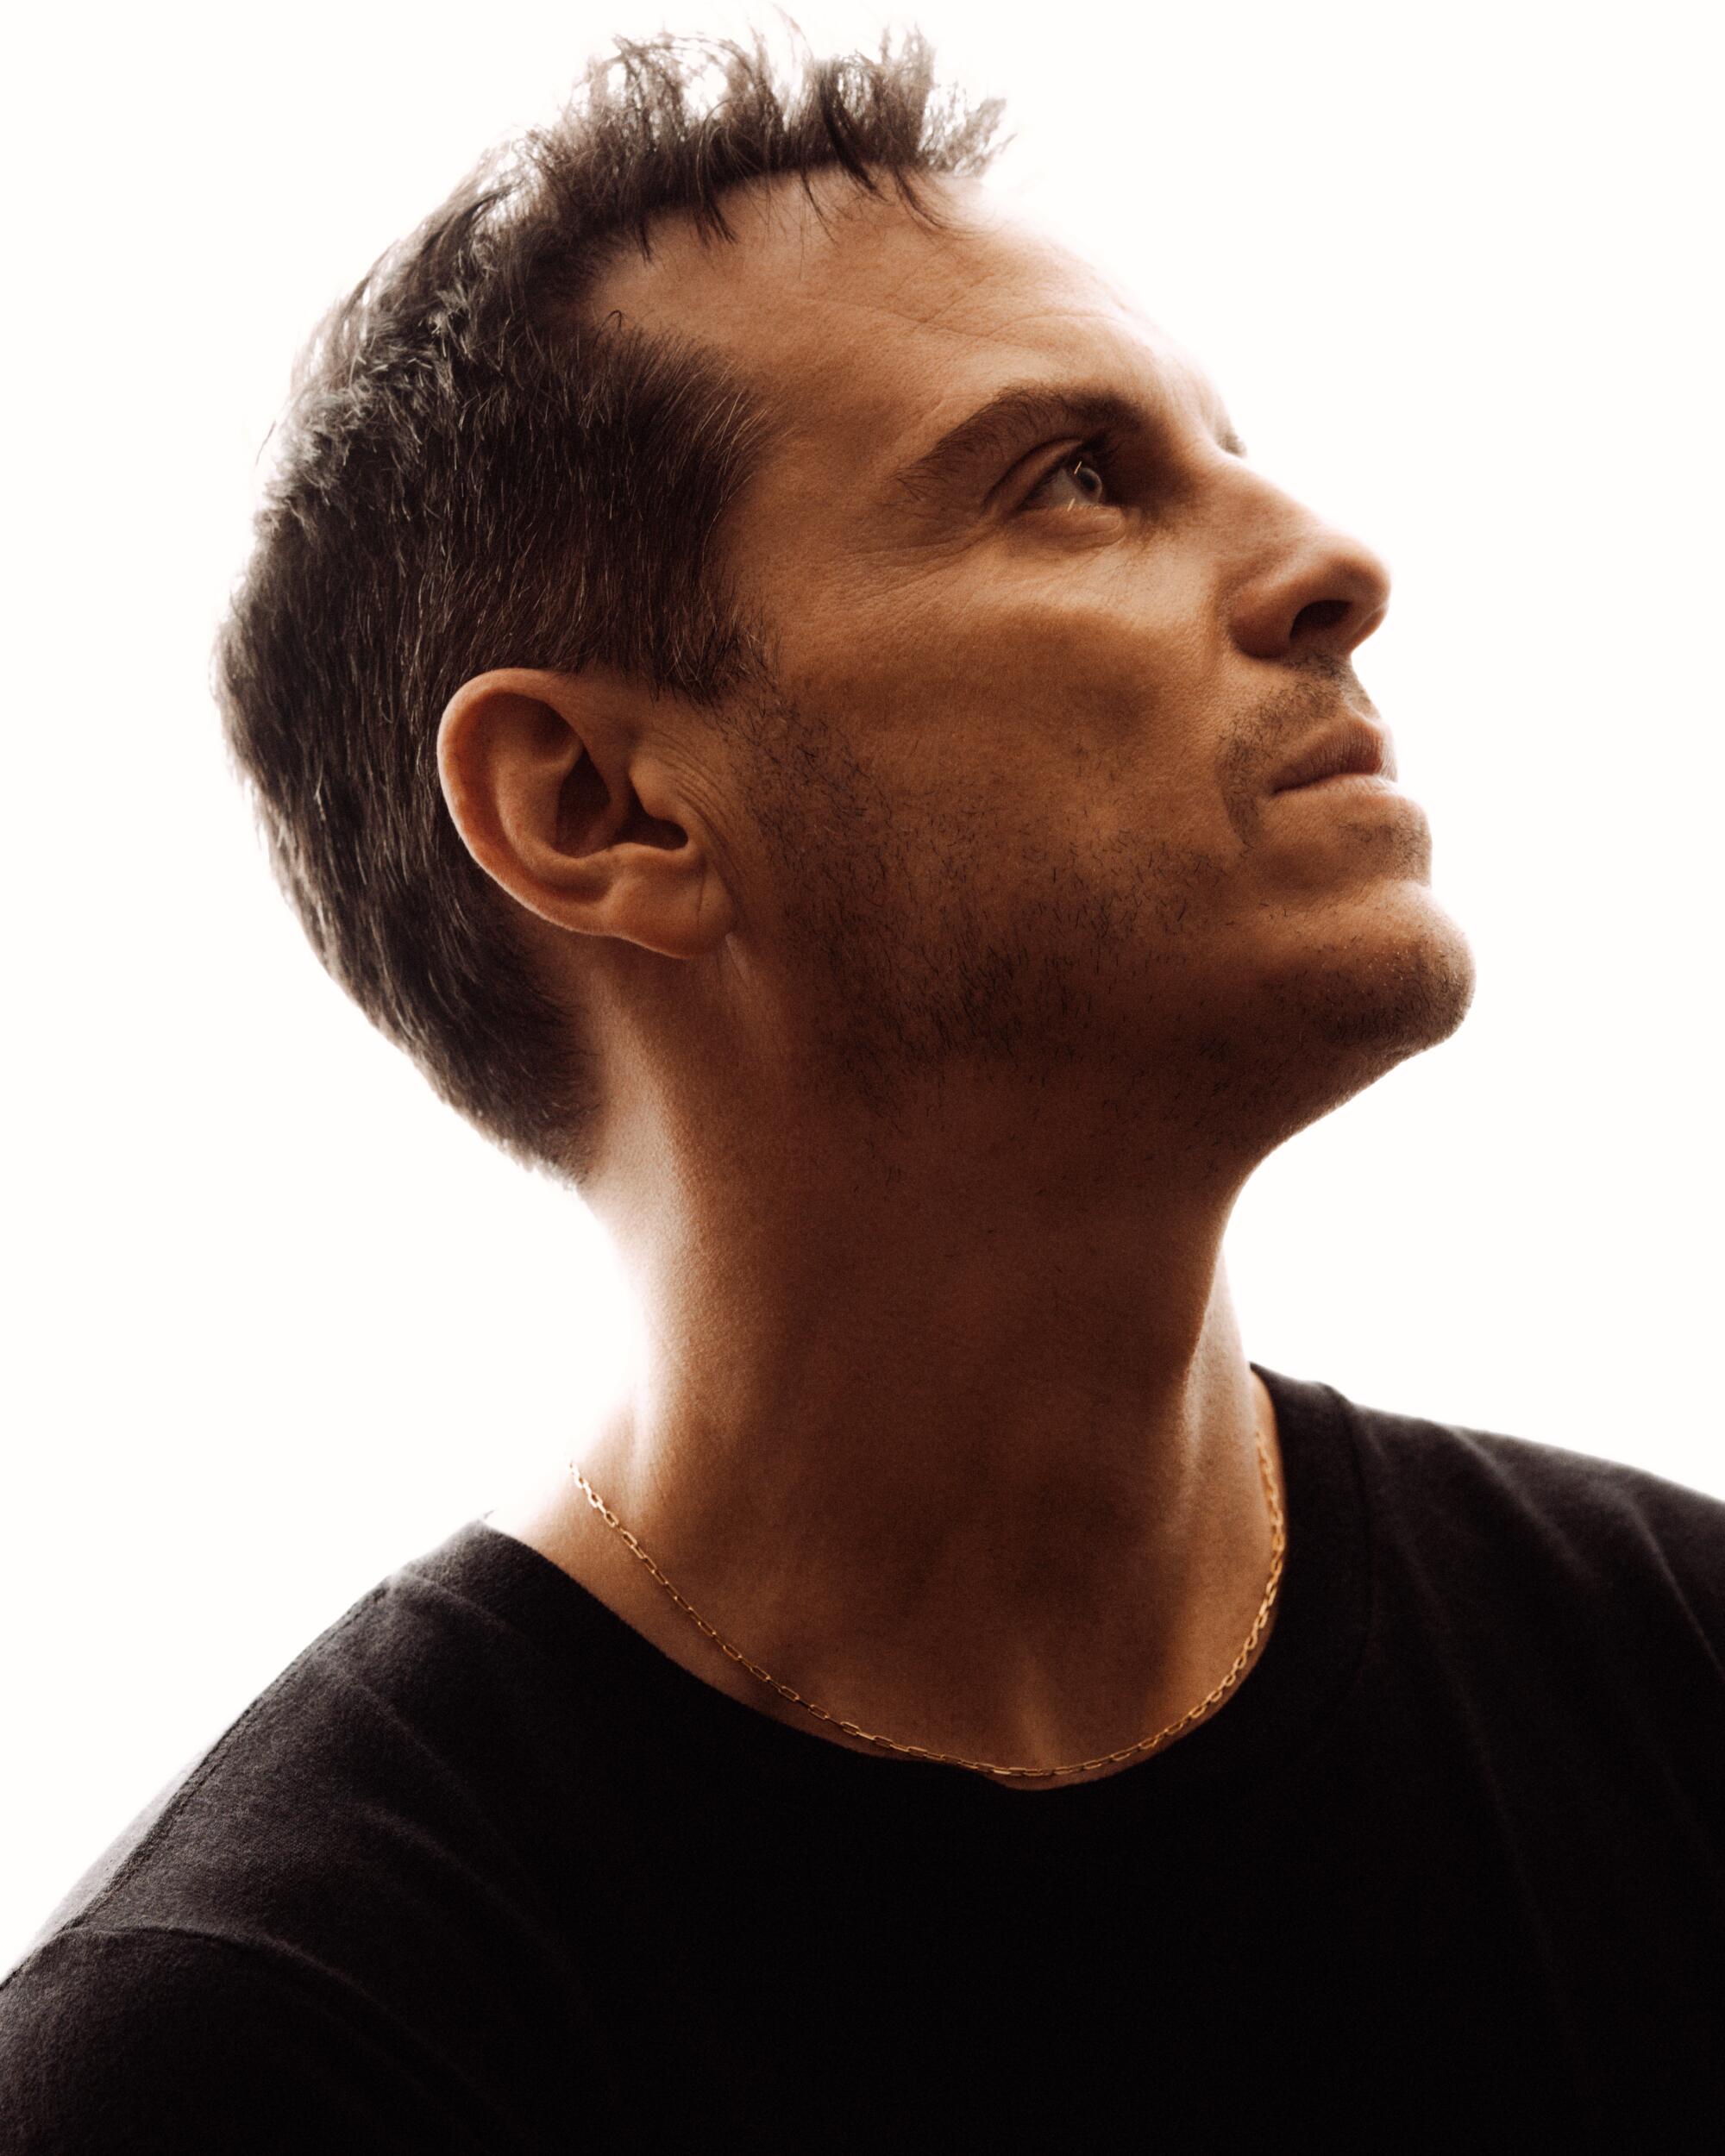 Andrew Scott looks up in a profile portrait.